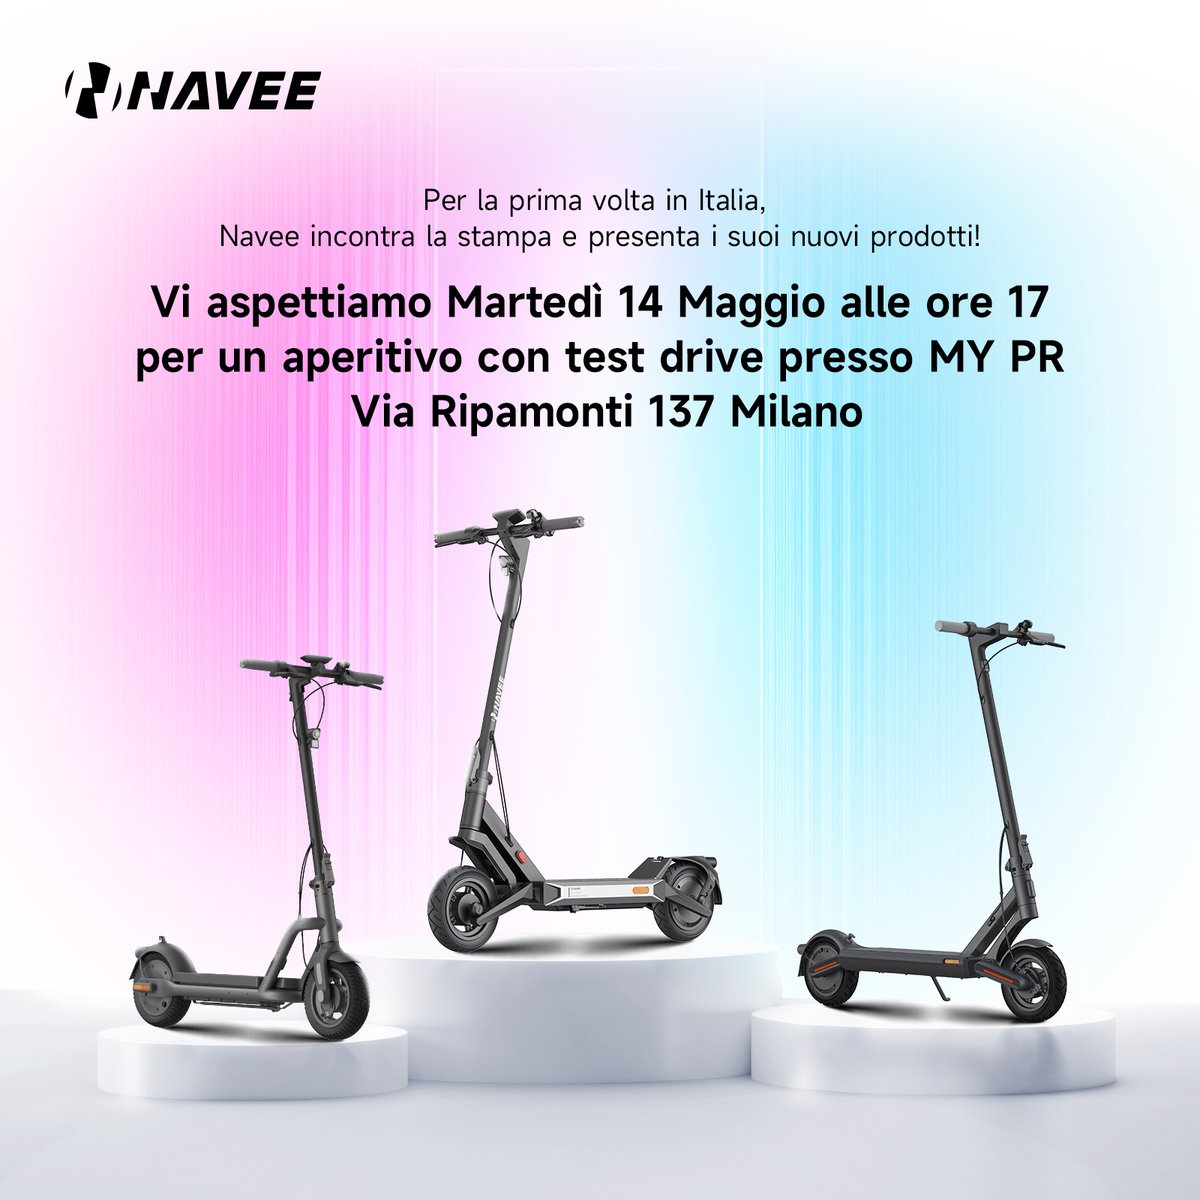 Navee is excited to unveil the all-new S40 and S60 electric scooters at our launch event in Milan! We're inviting media and bloggers to an exclusive test ride event where you'll be the first to experience our latest models.
#ElectricScooter #MilanLaunch🌟